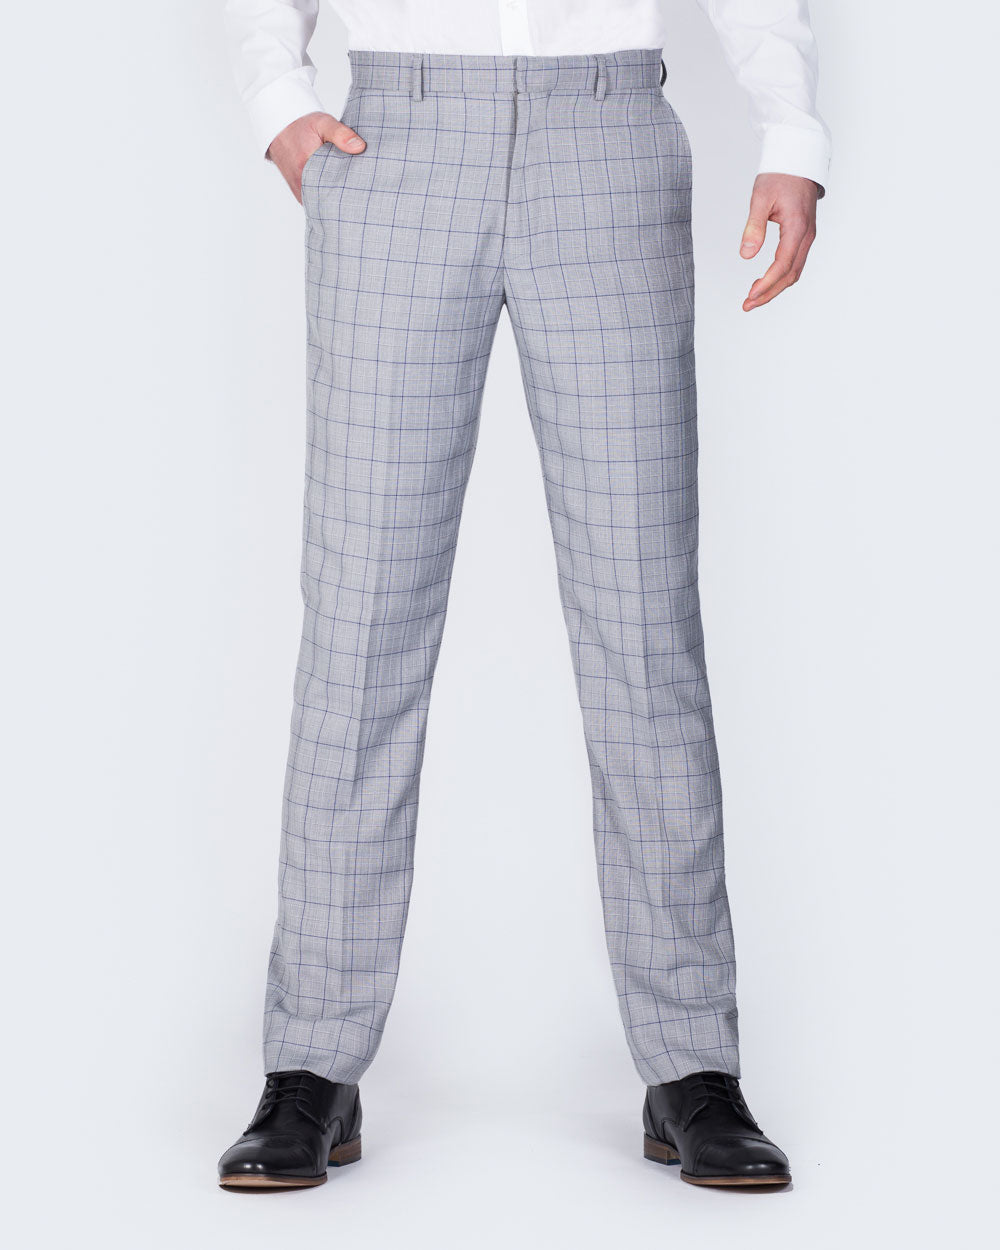 2t Slim Fit Tall Trousers (grey check)